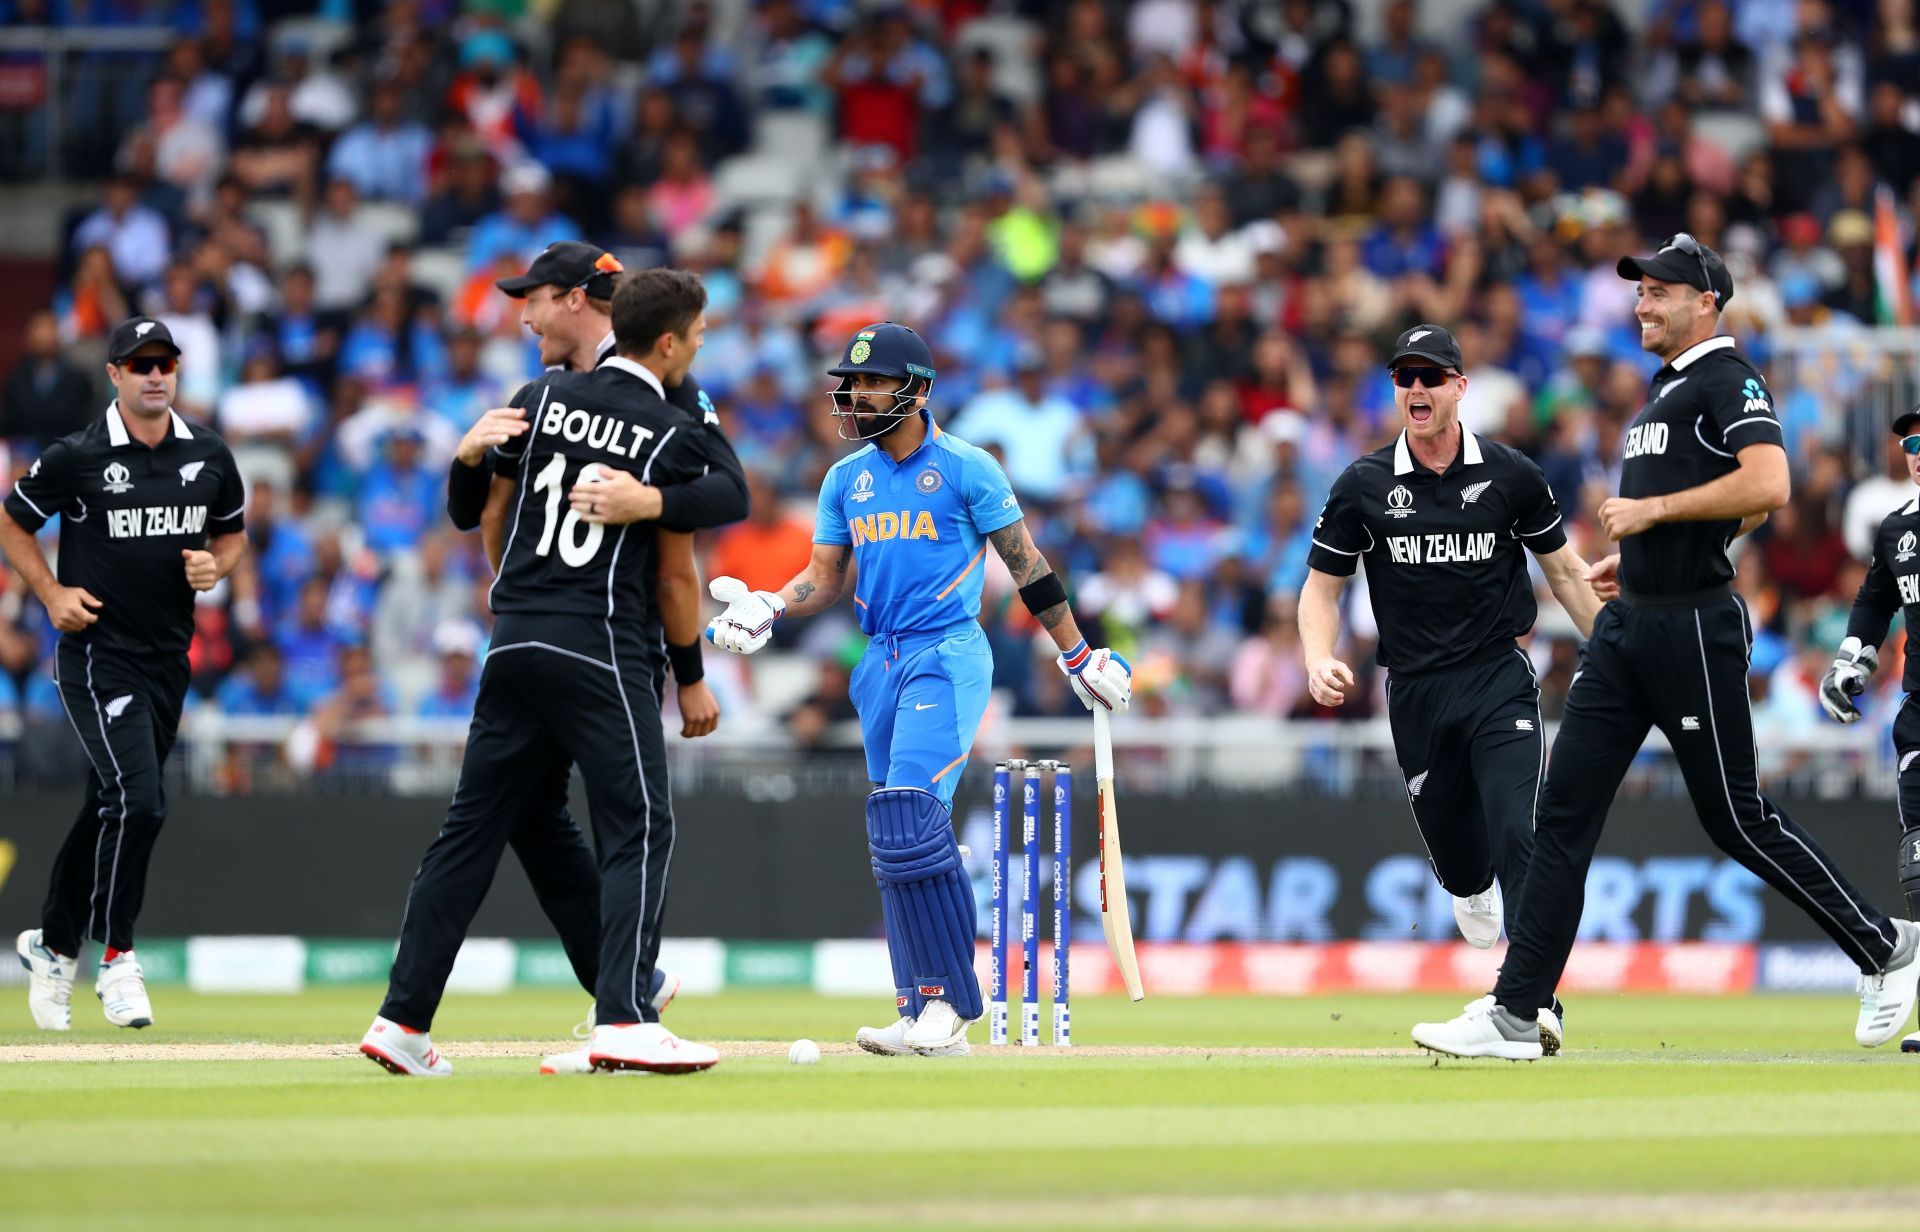 India have had a tough time against Trent Boult in recent encounters